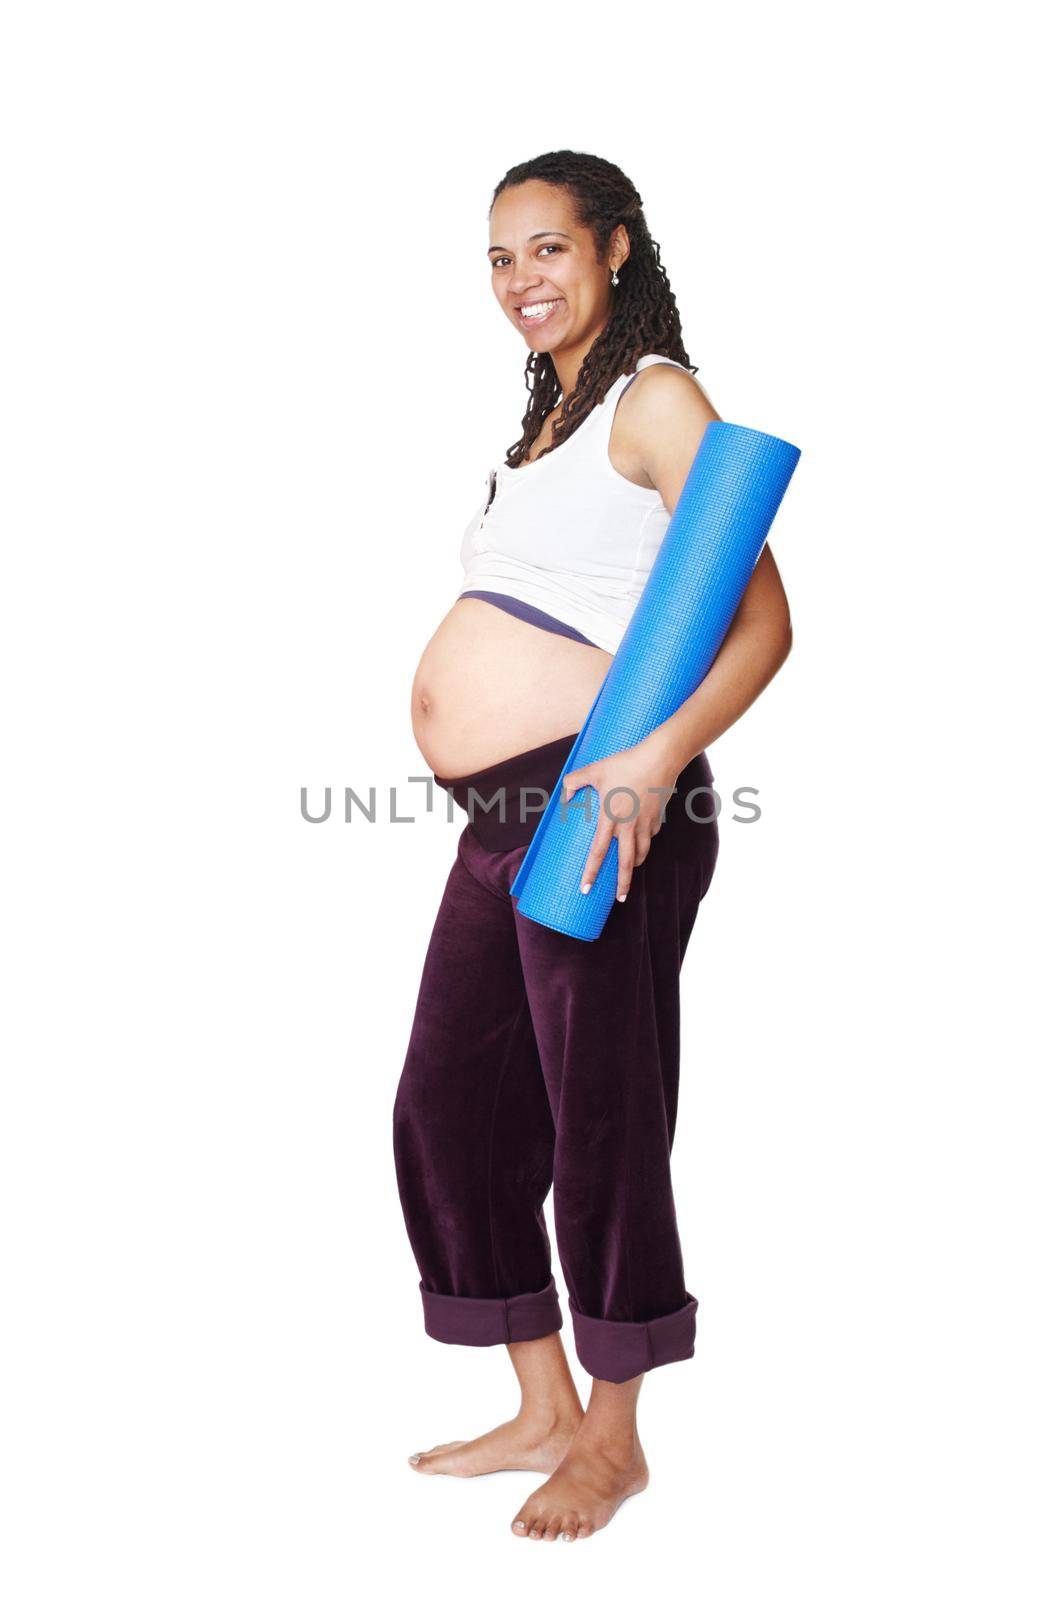 Pregnant, happy and yoga woman in portrait shows pregnancy, healthcare and wellness for her baby. Pilates, fitness and spiritual mother to be with a smile, mat and big stomach in studio for exercise.